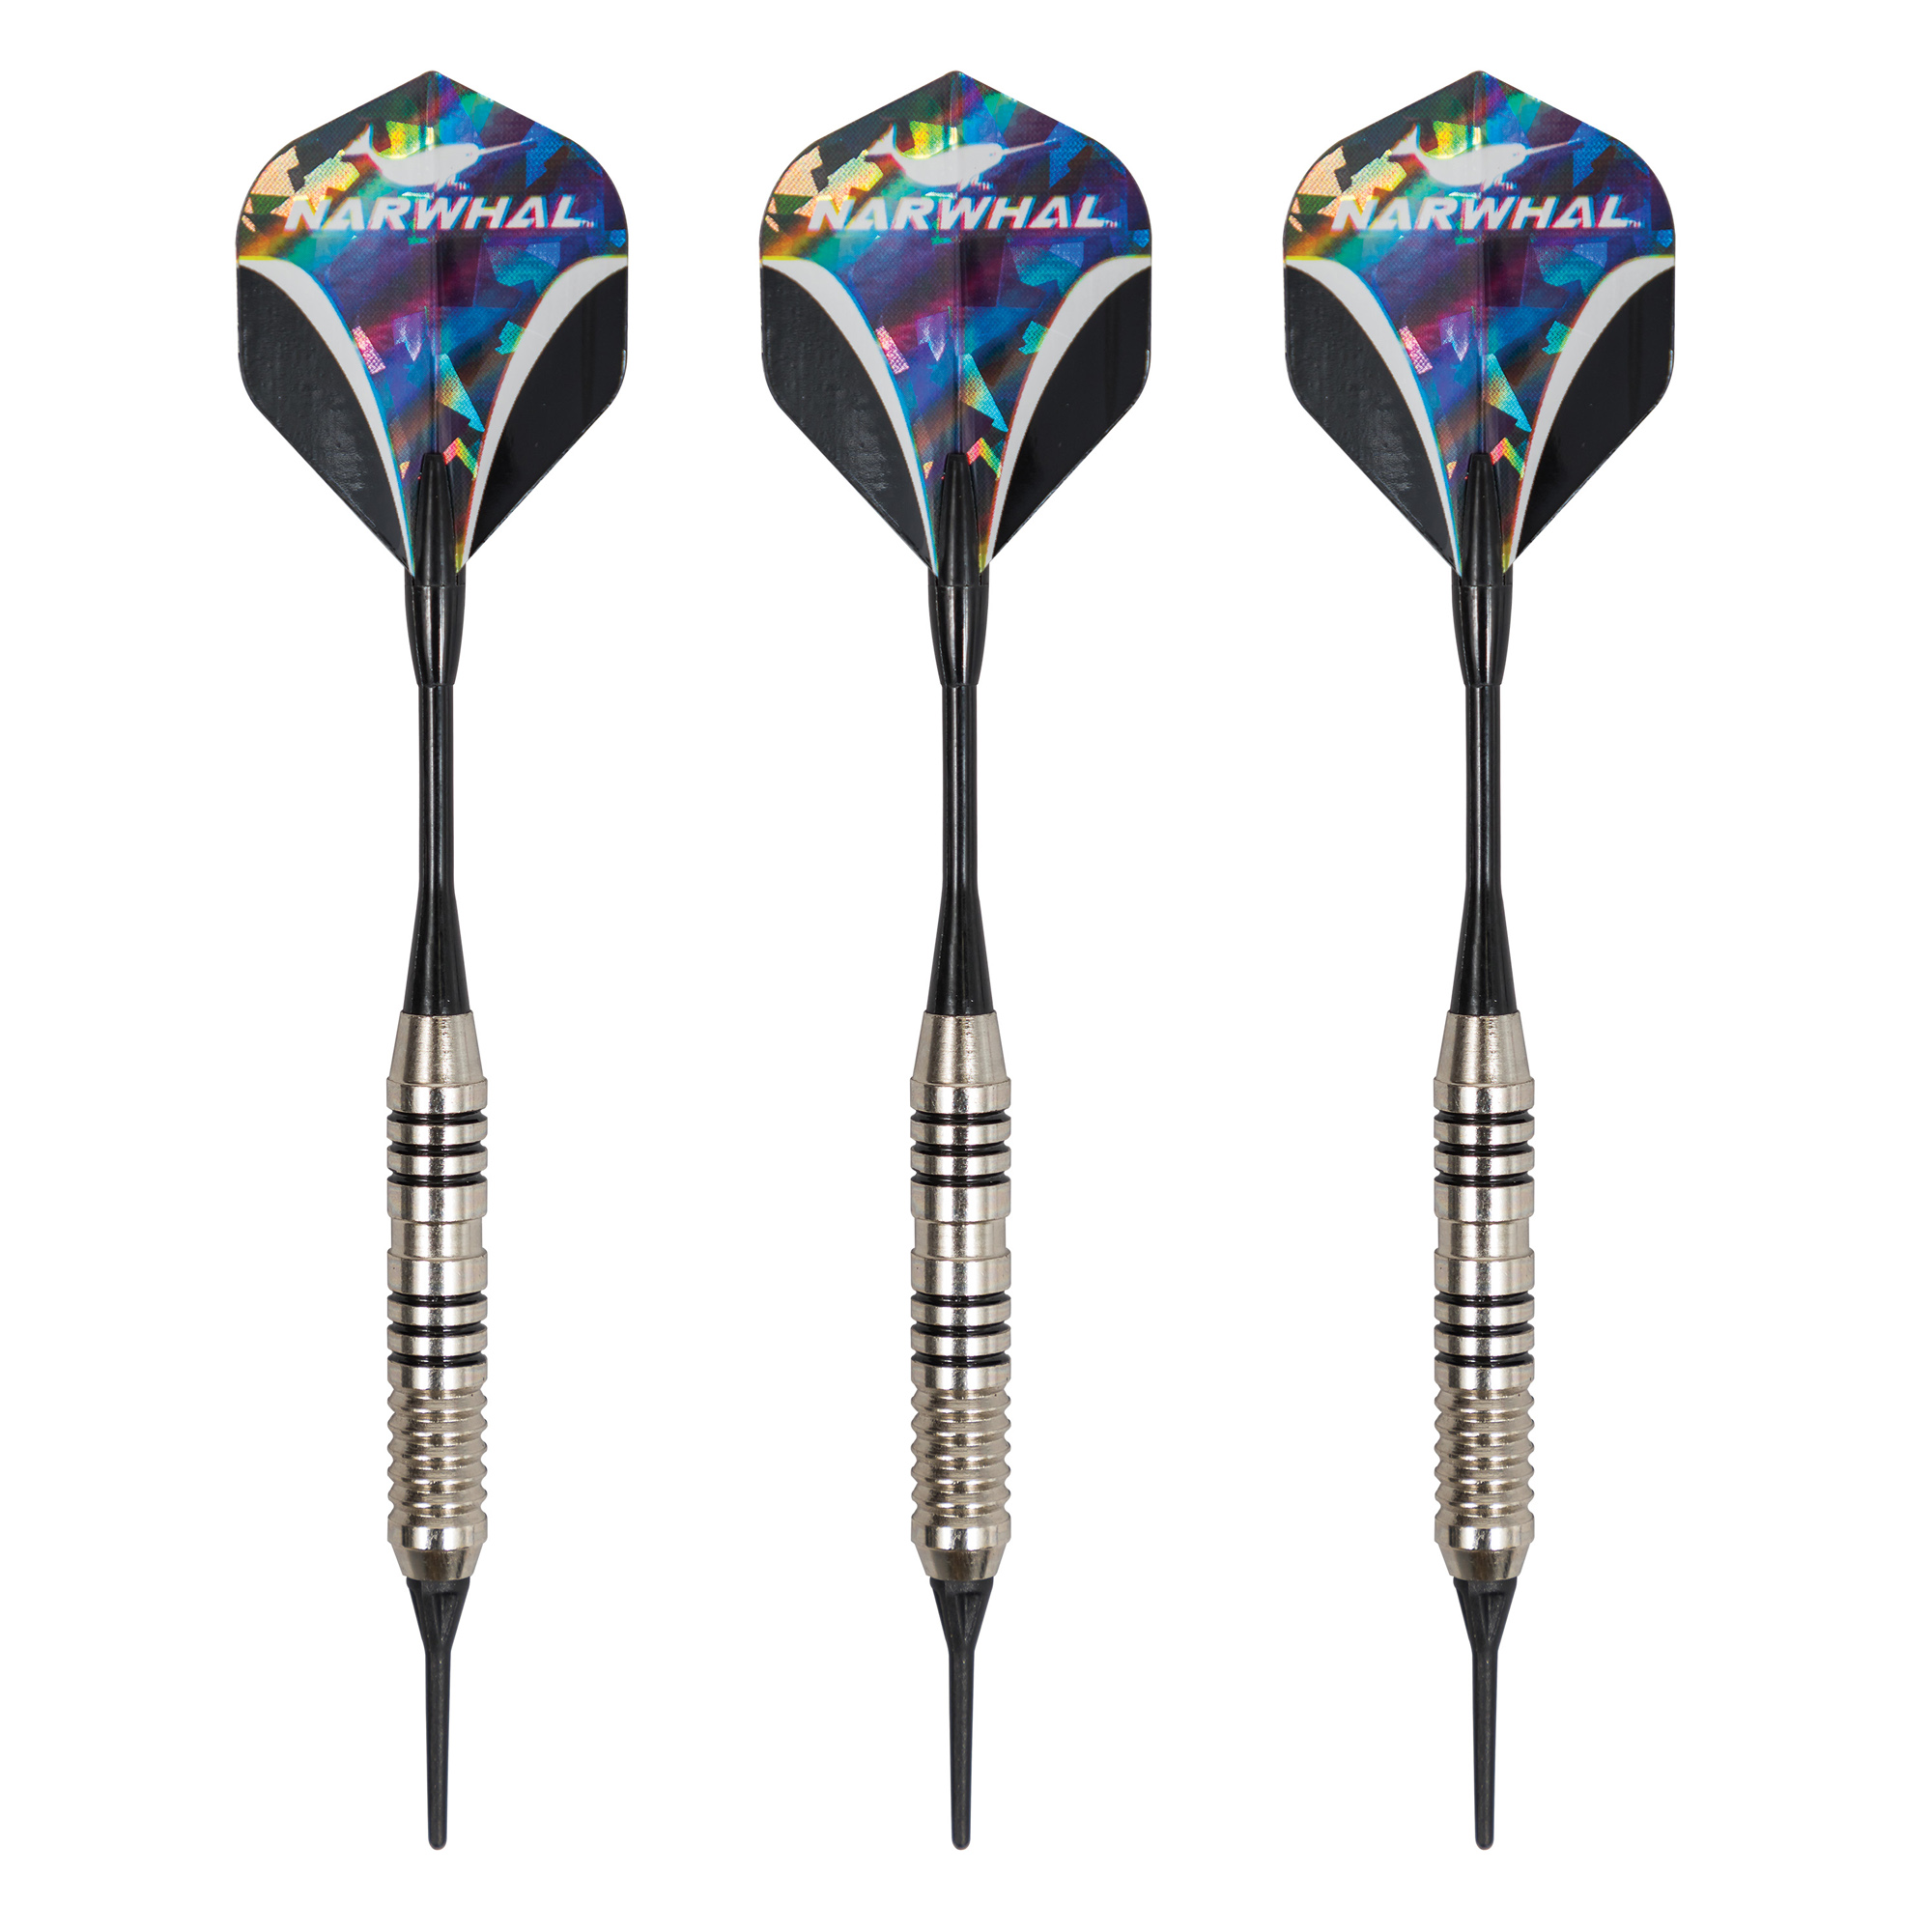 Narwhal Tournament Soft Tip Dart Set for Electronic Dartboards, 18g, 7 in. - 3 Pack with Carry Case - image 3 of 15